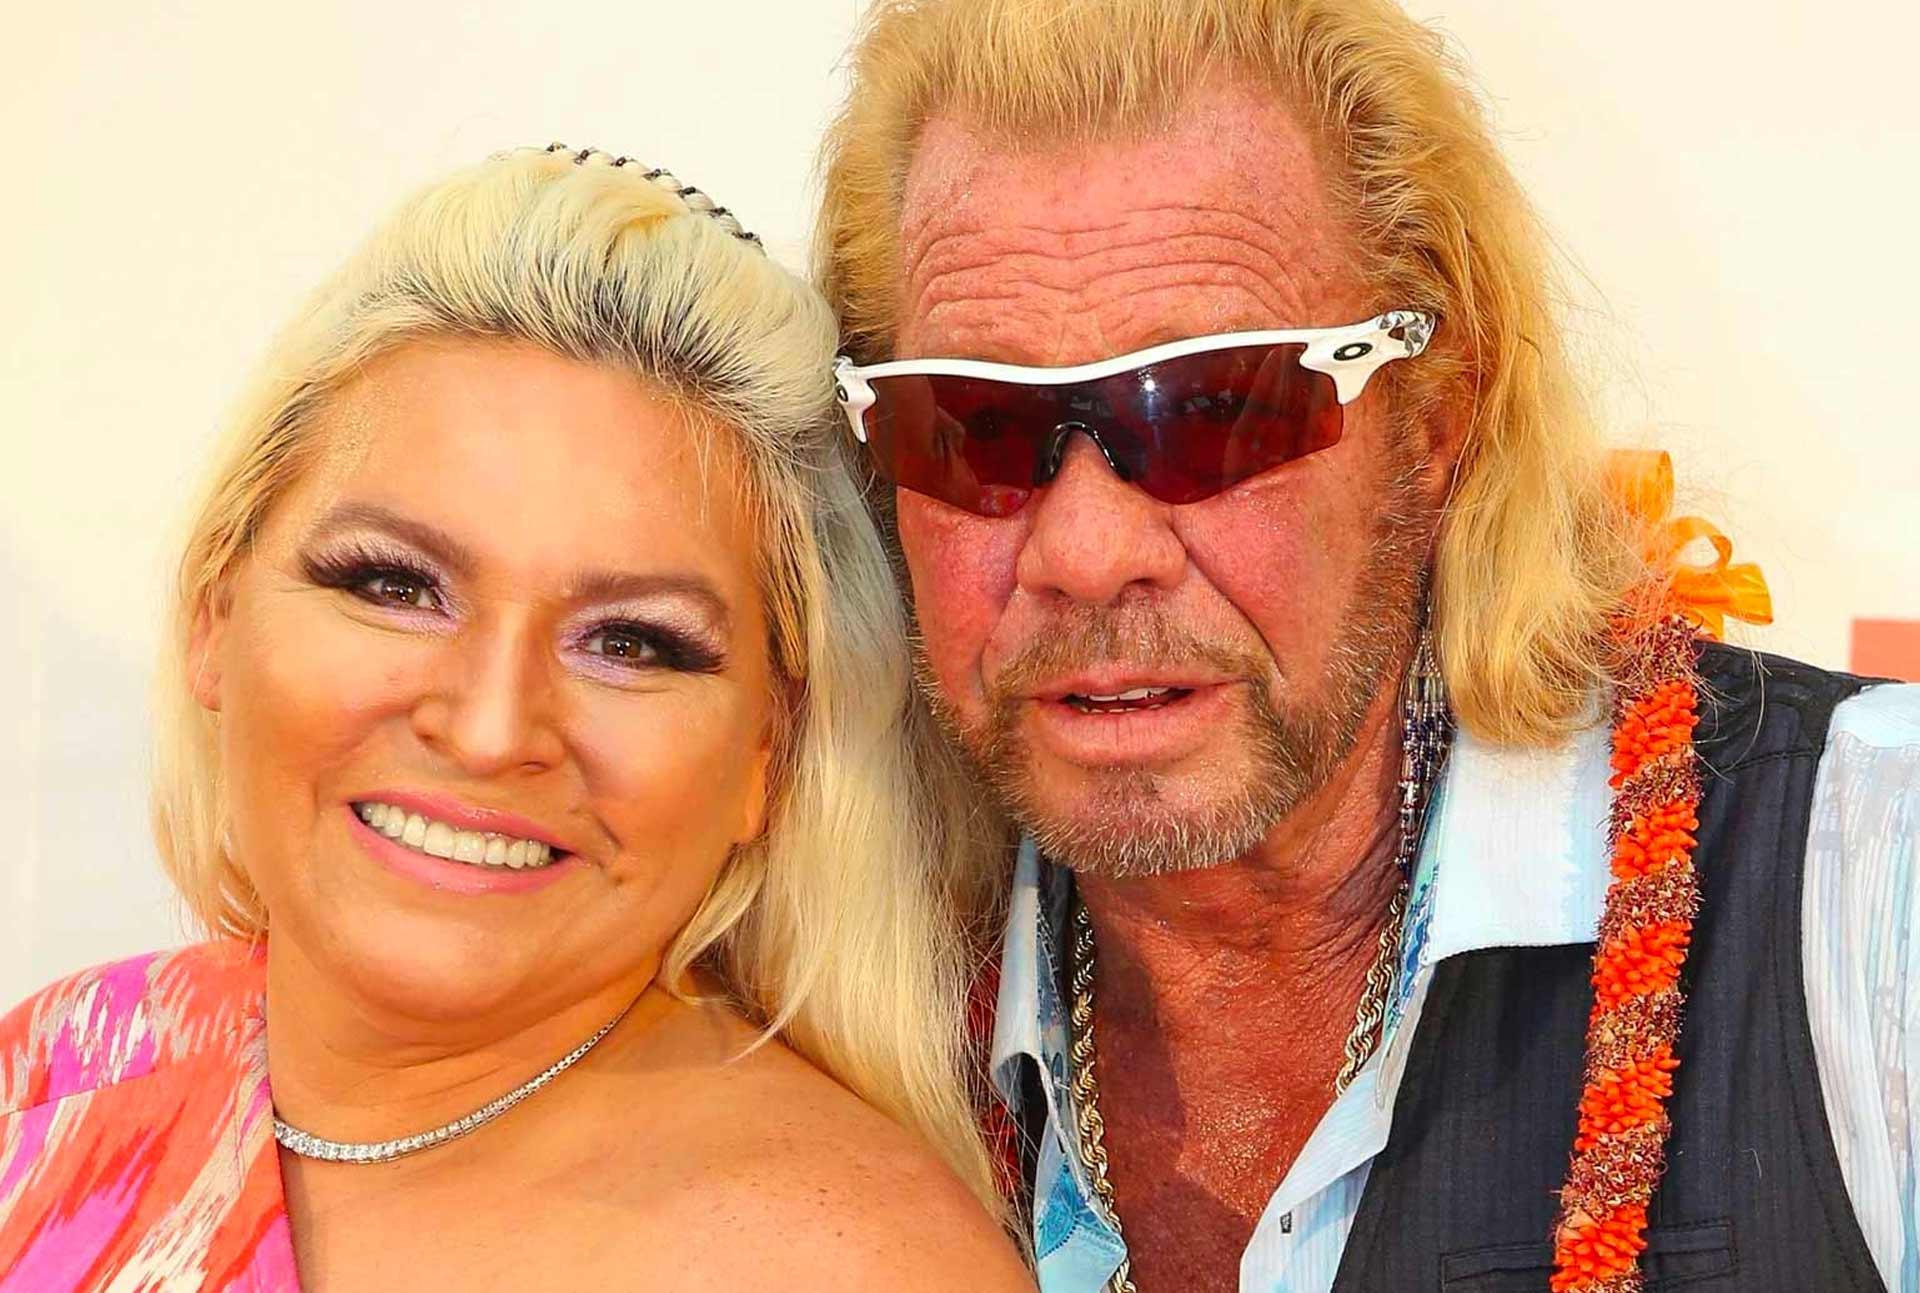 Beth Chapman, Reality Star and Wife of Duane ‘Dog’ Chapman, Dies After Battle With Cancer